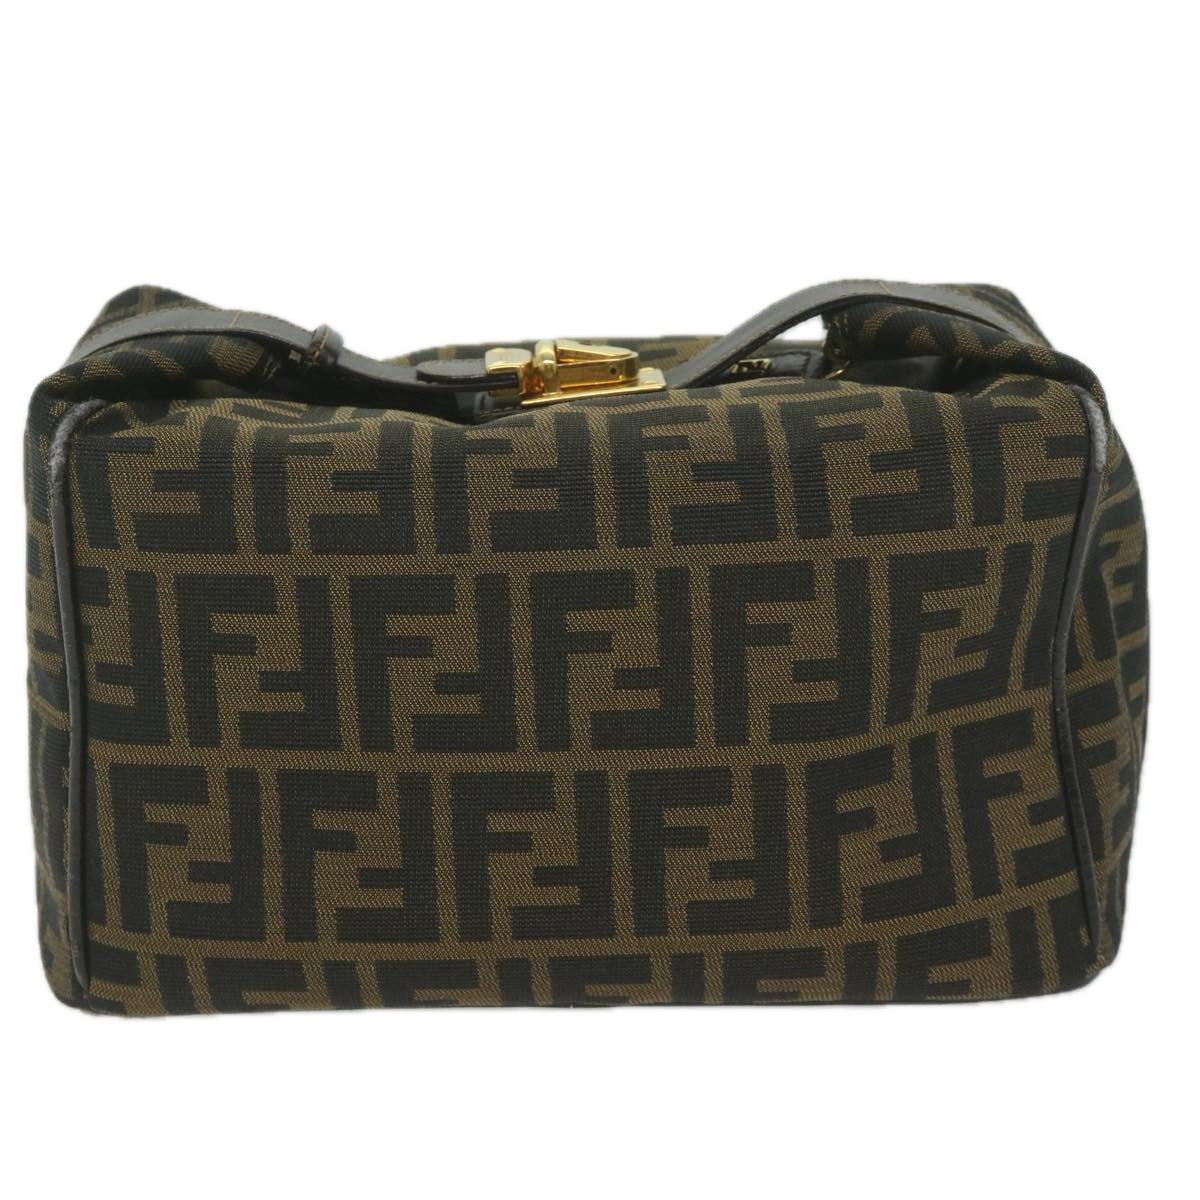 FENDI Zucca Canvas Vanity Cosmetic Pouch Black Brown Auth 61796 - 0